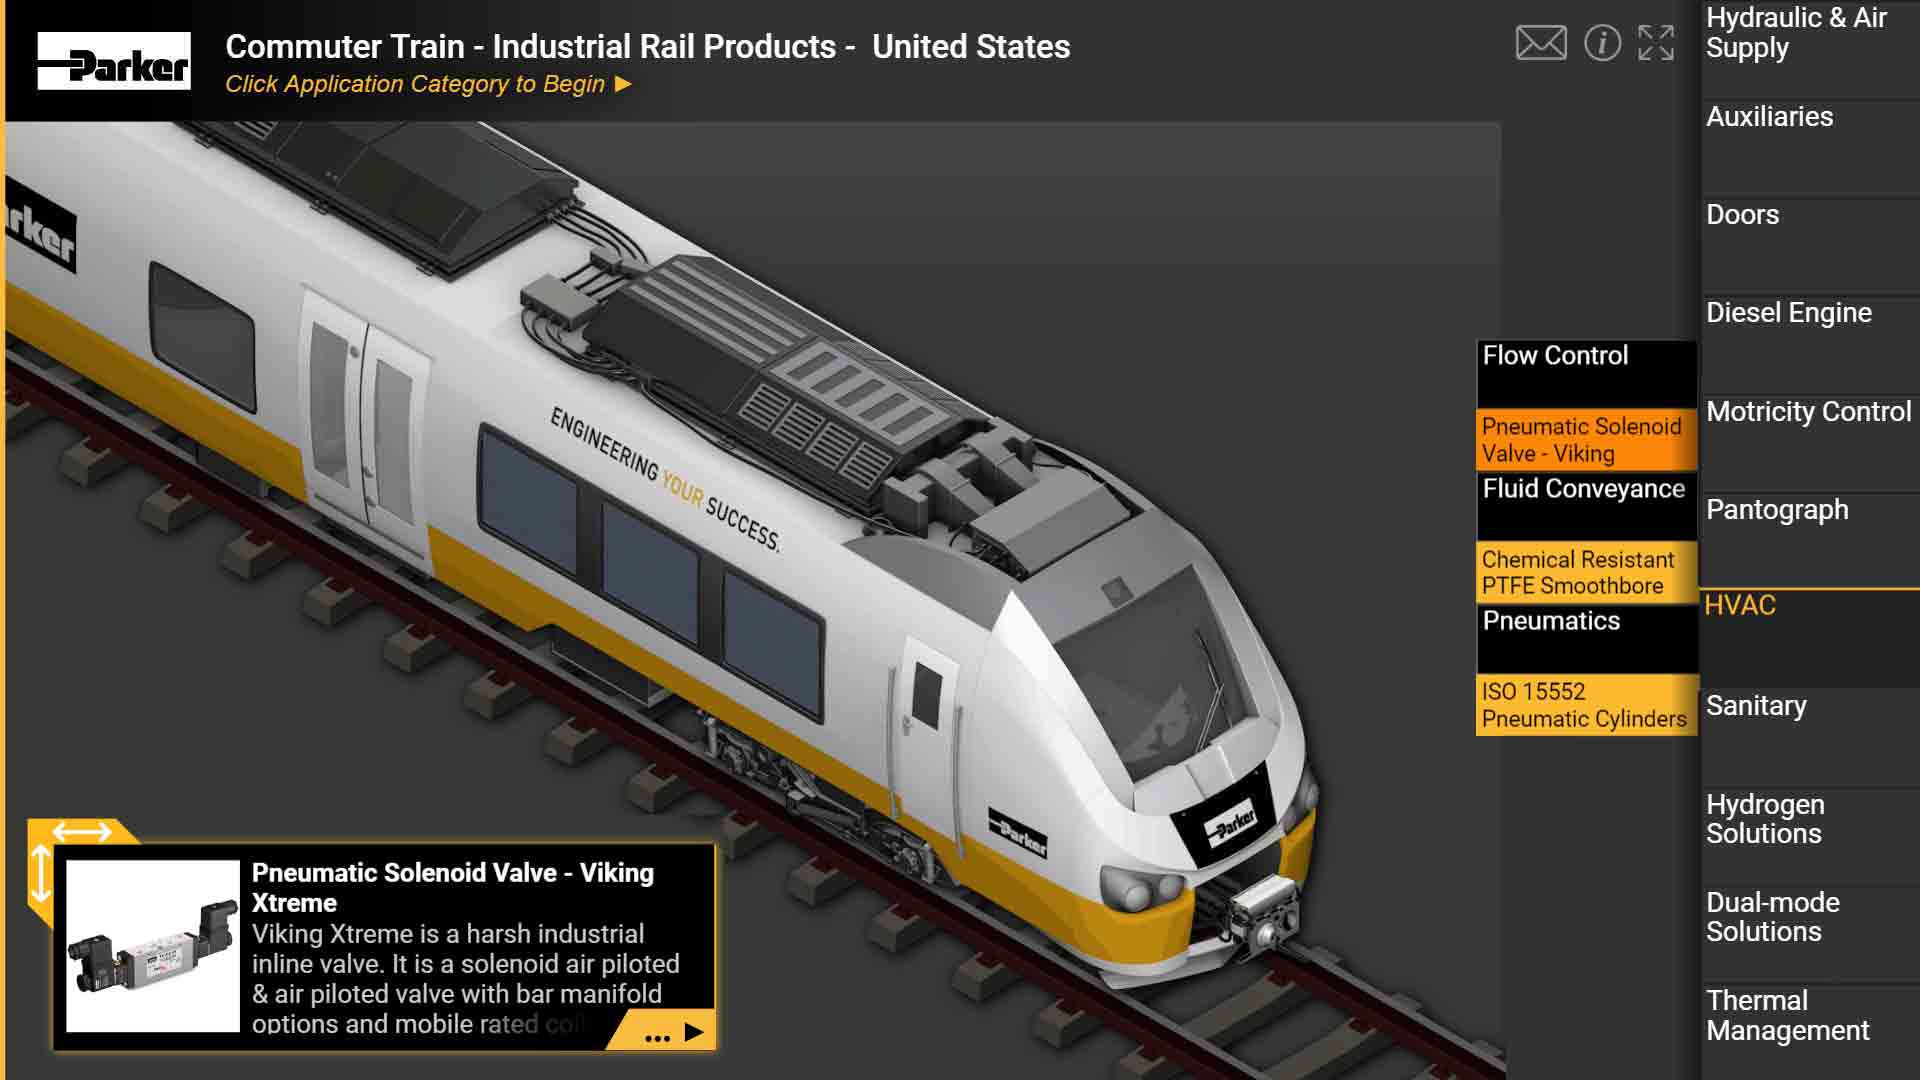 Asia Pacific OEM Industrial Products and Equipment Passenger Rail